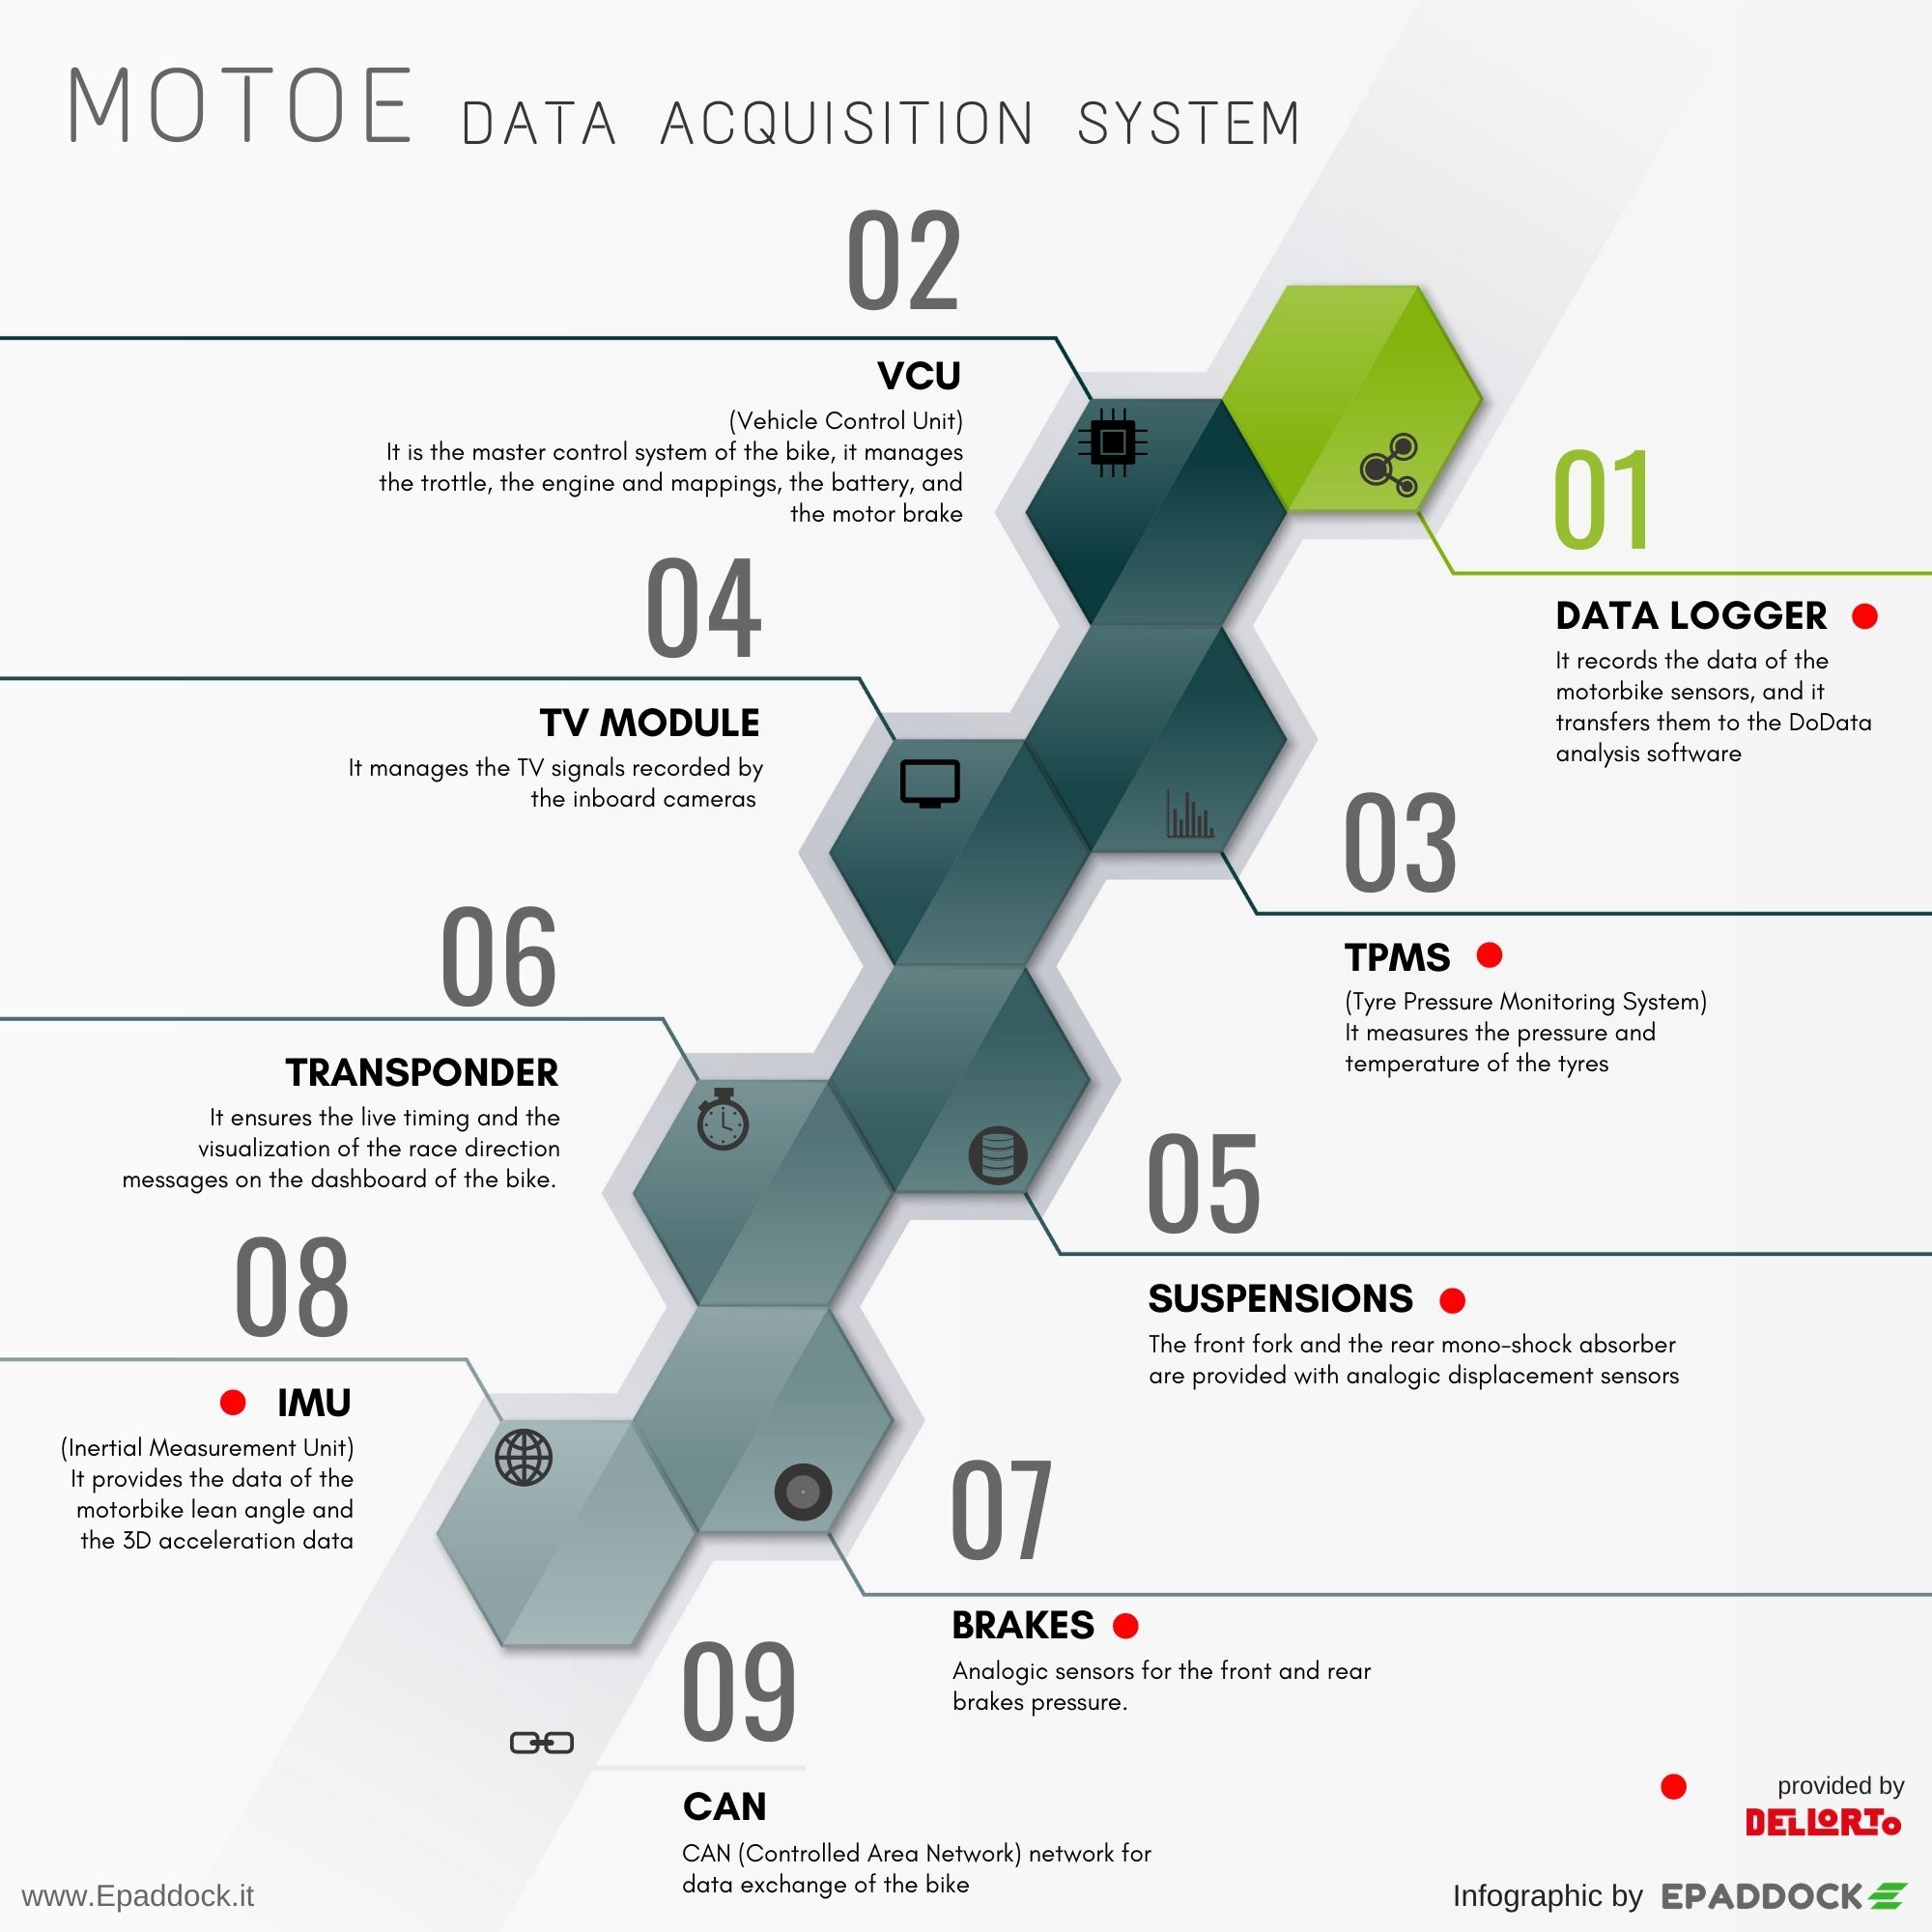 The data acquisition system of the MotoE